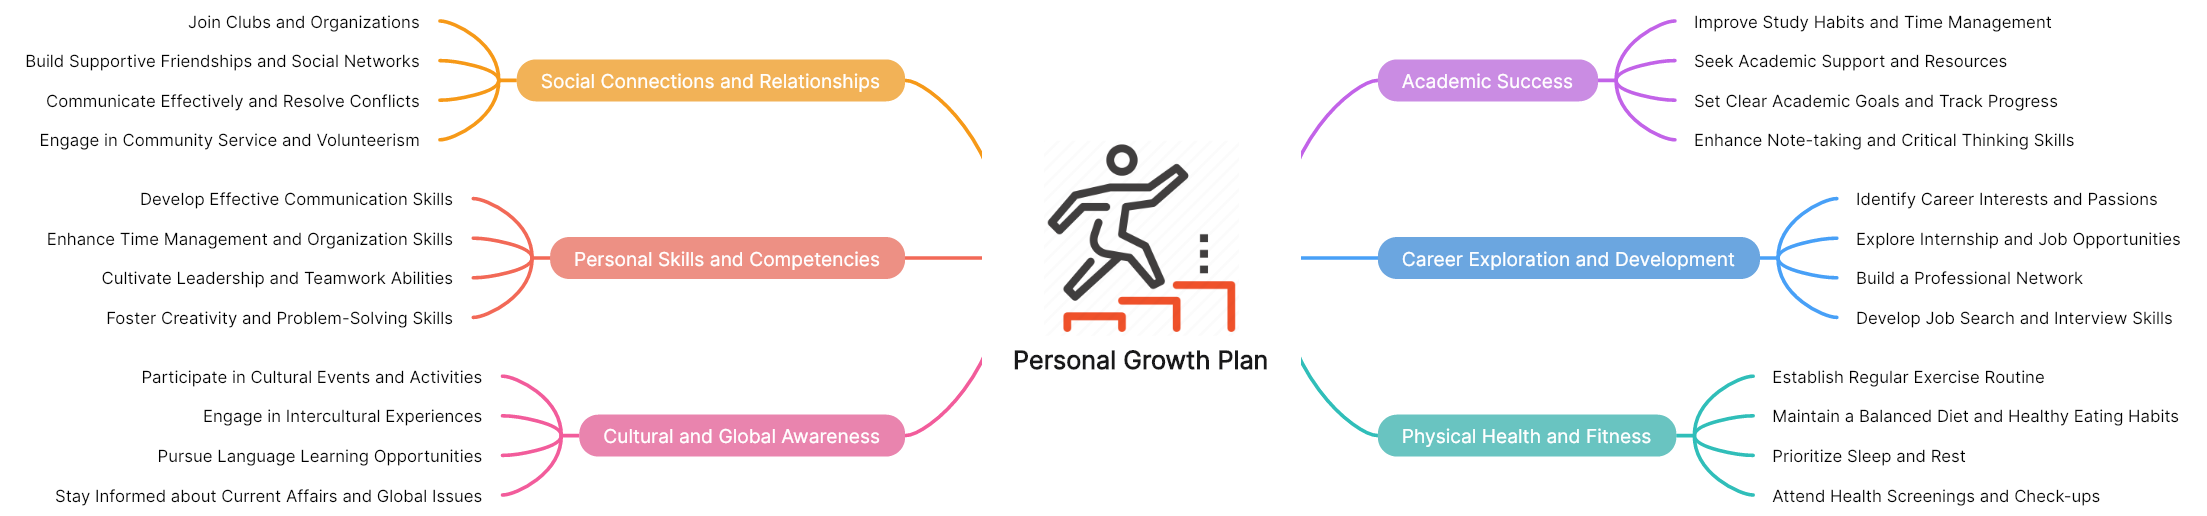 Personal Growth Plan